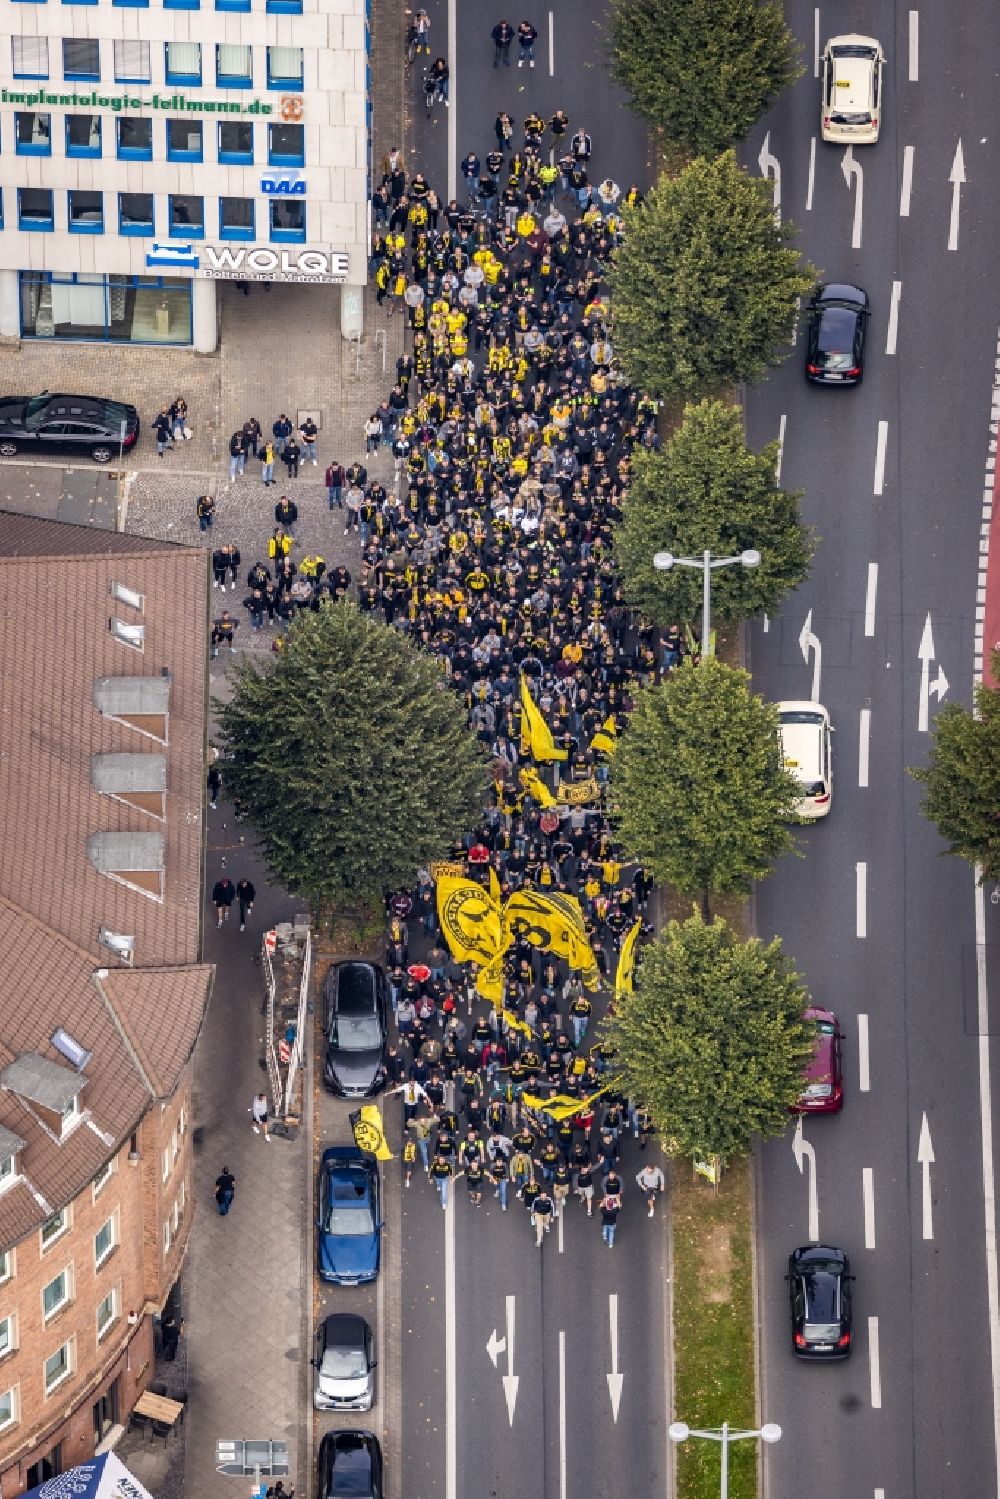 Aerial image Dortmund - Participants - fans of the BVB football club on their way to the football match on the corner of Poststrasse and Hohe Strasse in Dortmund at Ruhrgebiet in the state North Rhine-Westphalia, Germany